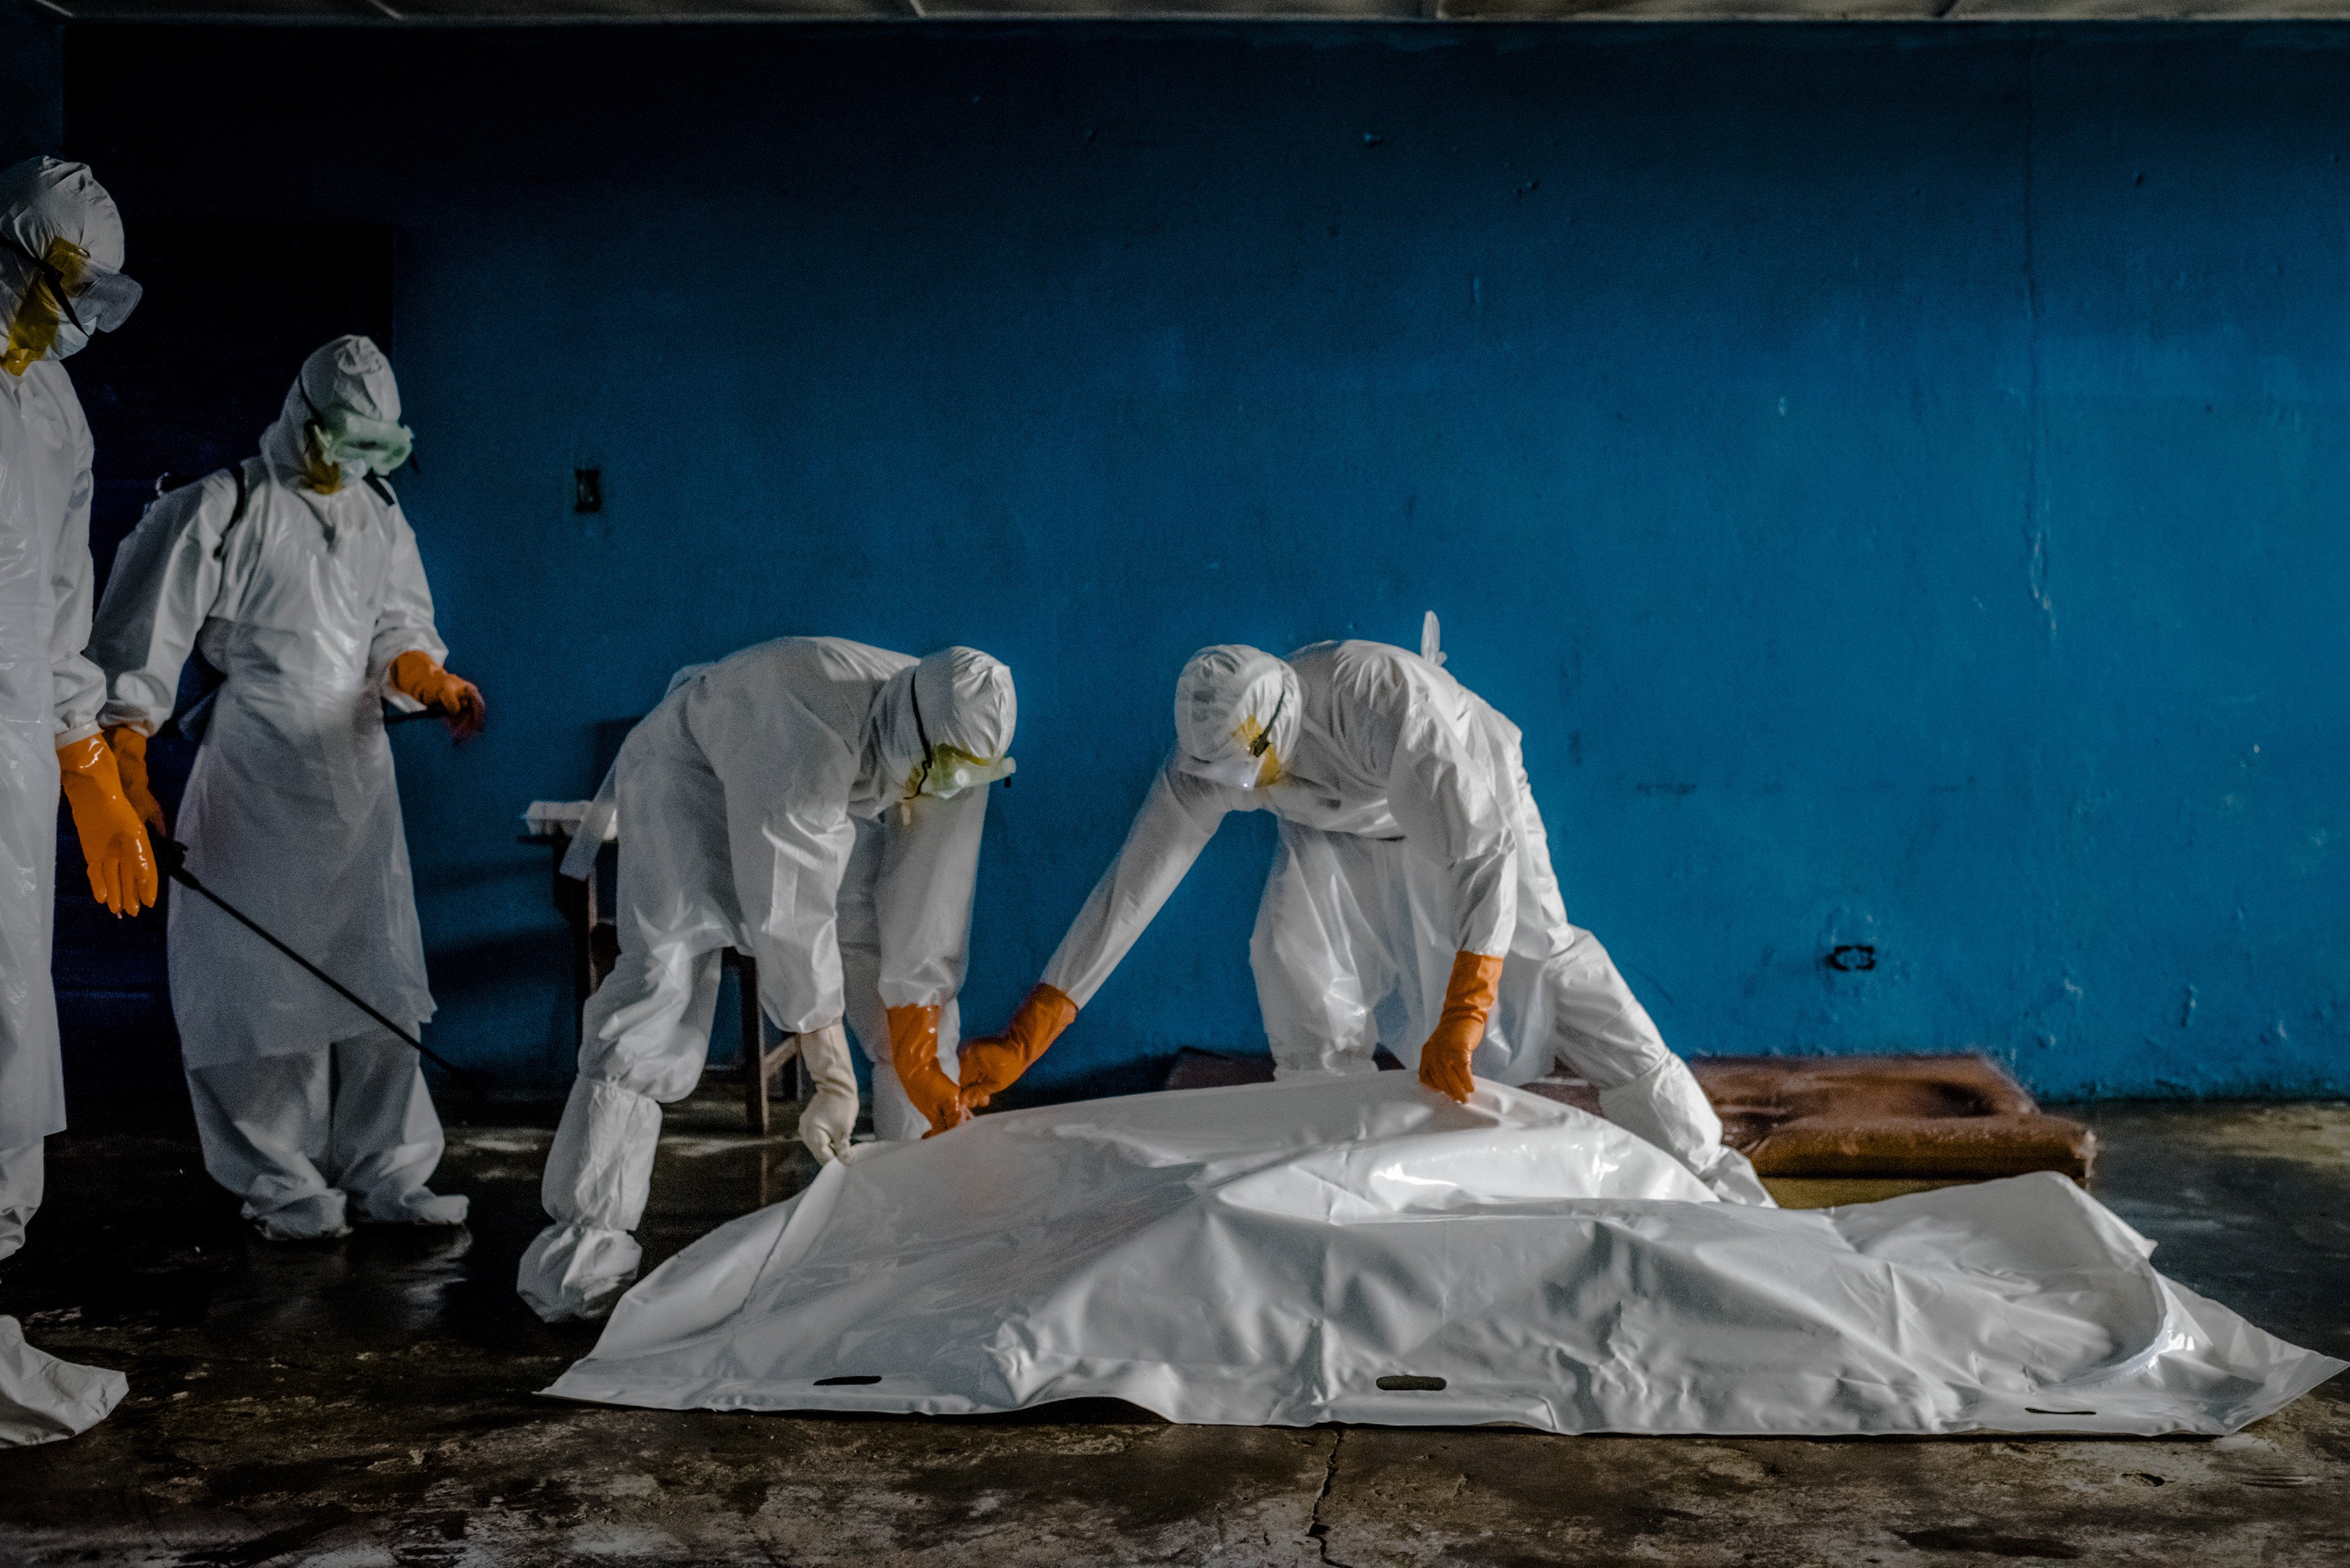 A burial team in protective clothing retrieves the body an Ebola victim from an isolation ward in the West Point neighborhood of Monrovia, Liberia.